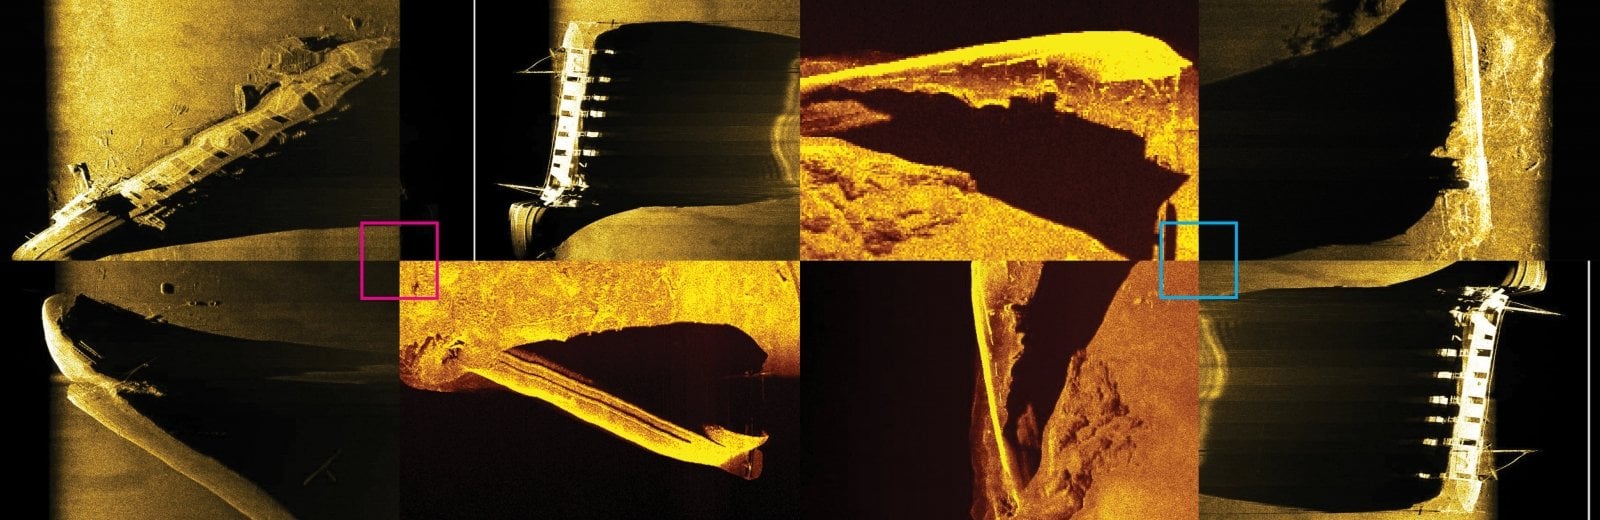 Robots and sonar yield acoustic images of underwater artifacts, including these shipwrecks in maritime preserves.